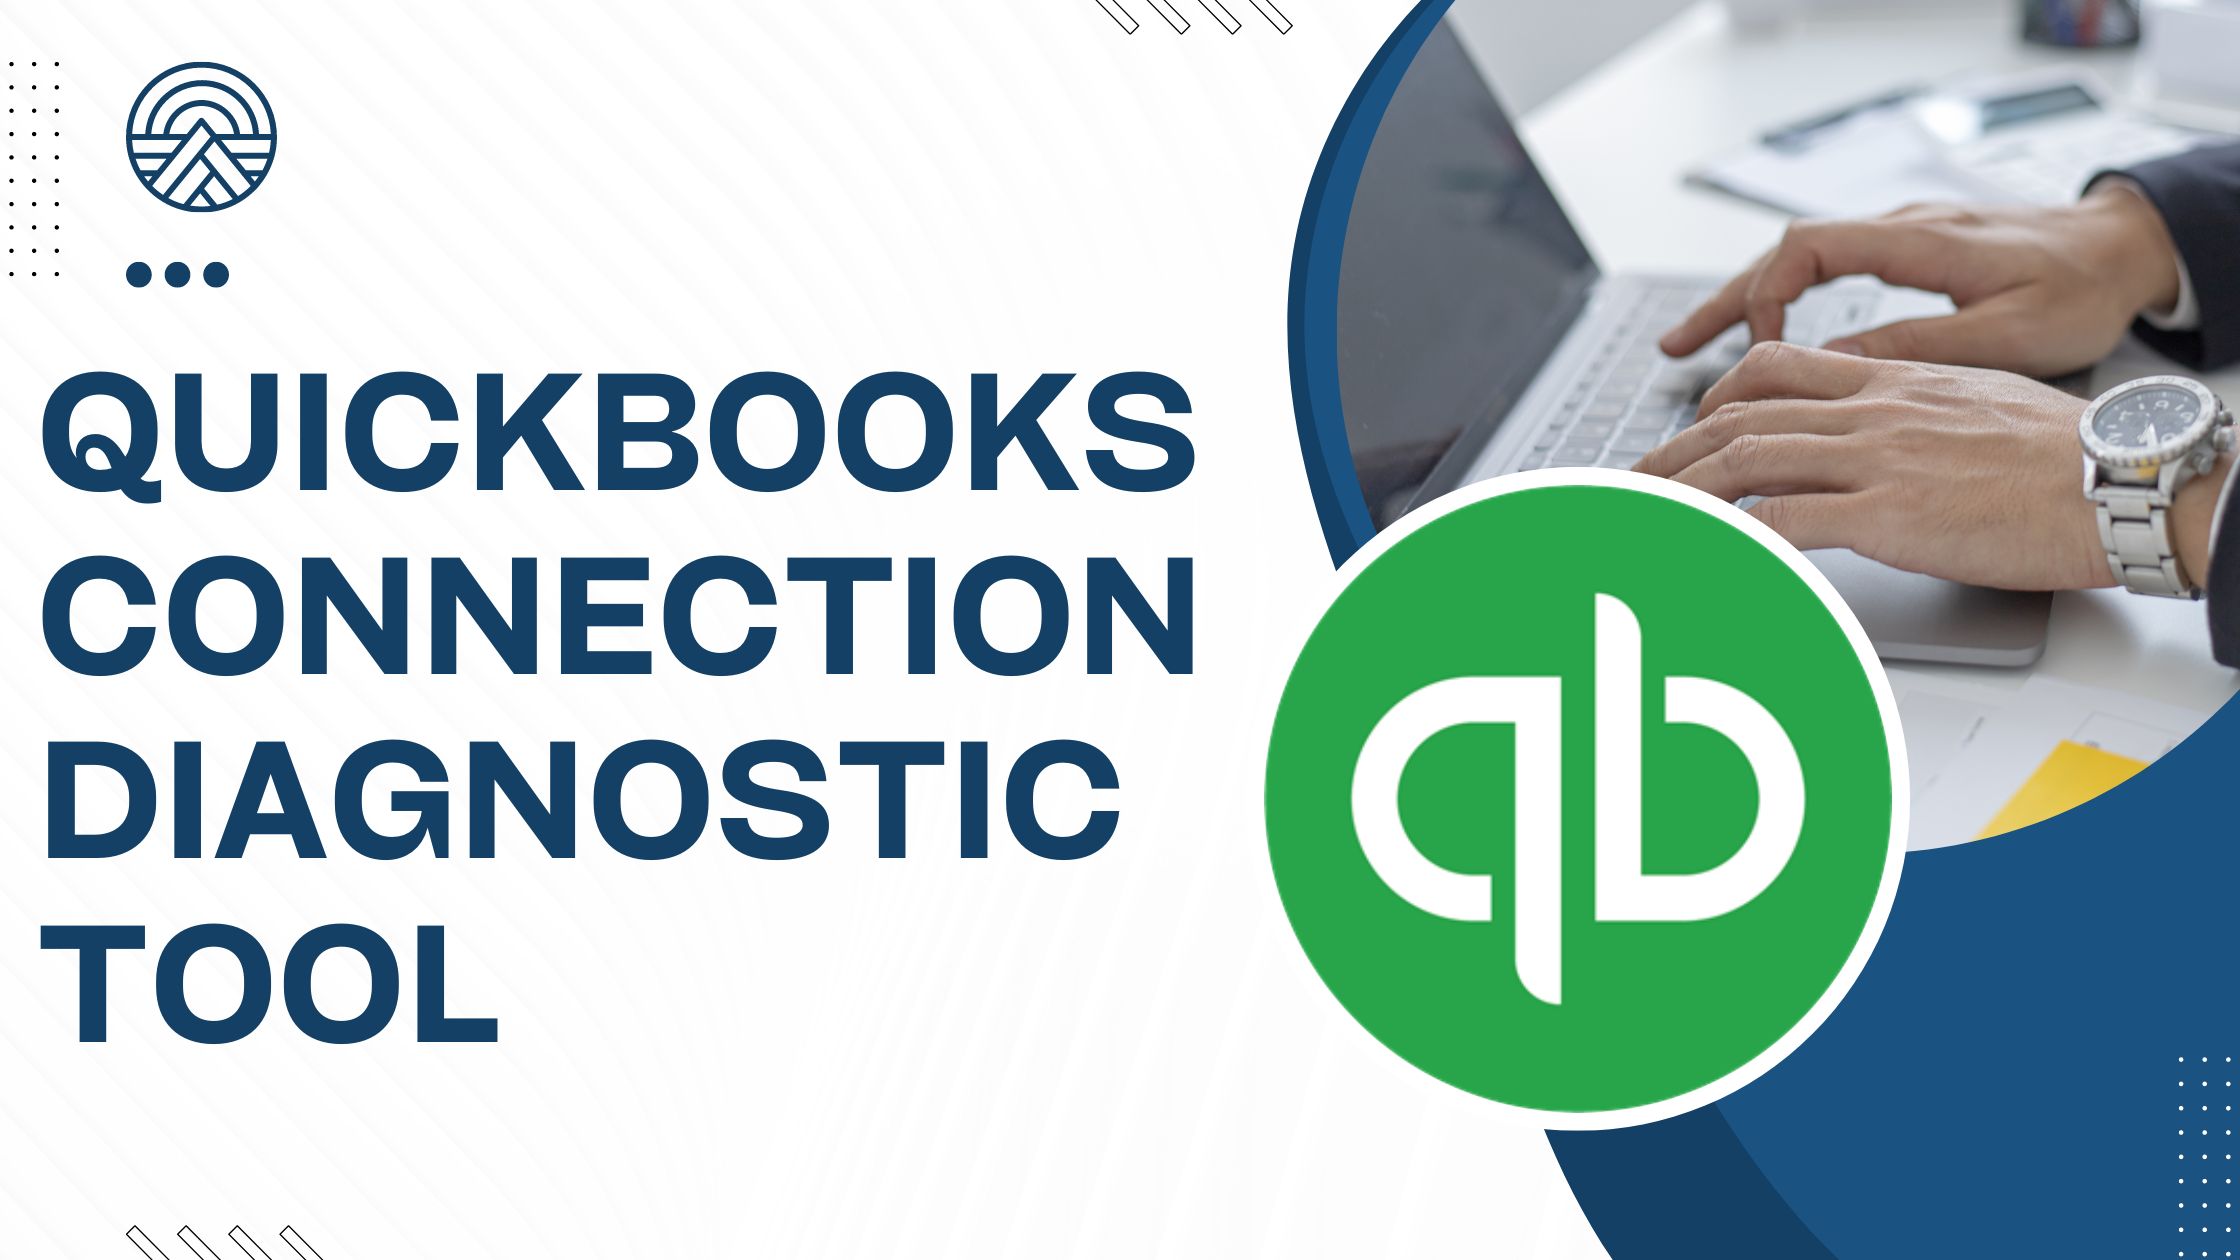 The Ultimate Guide to Use QuickBooks Connection Diagnostic Tool